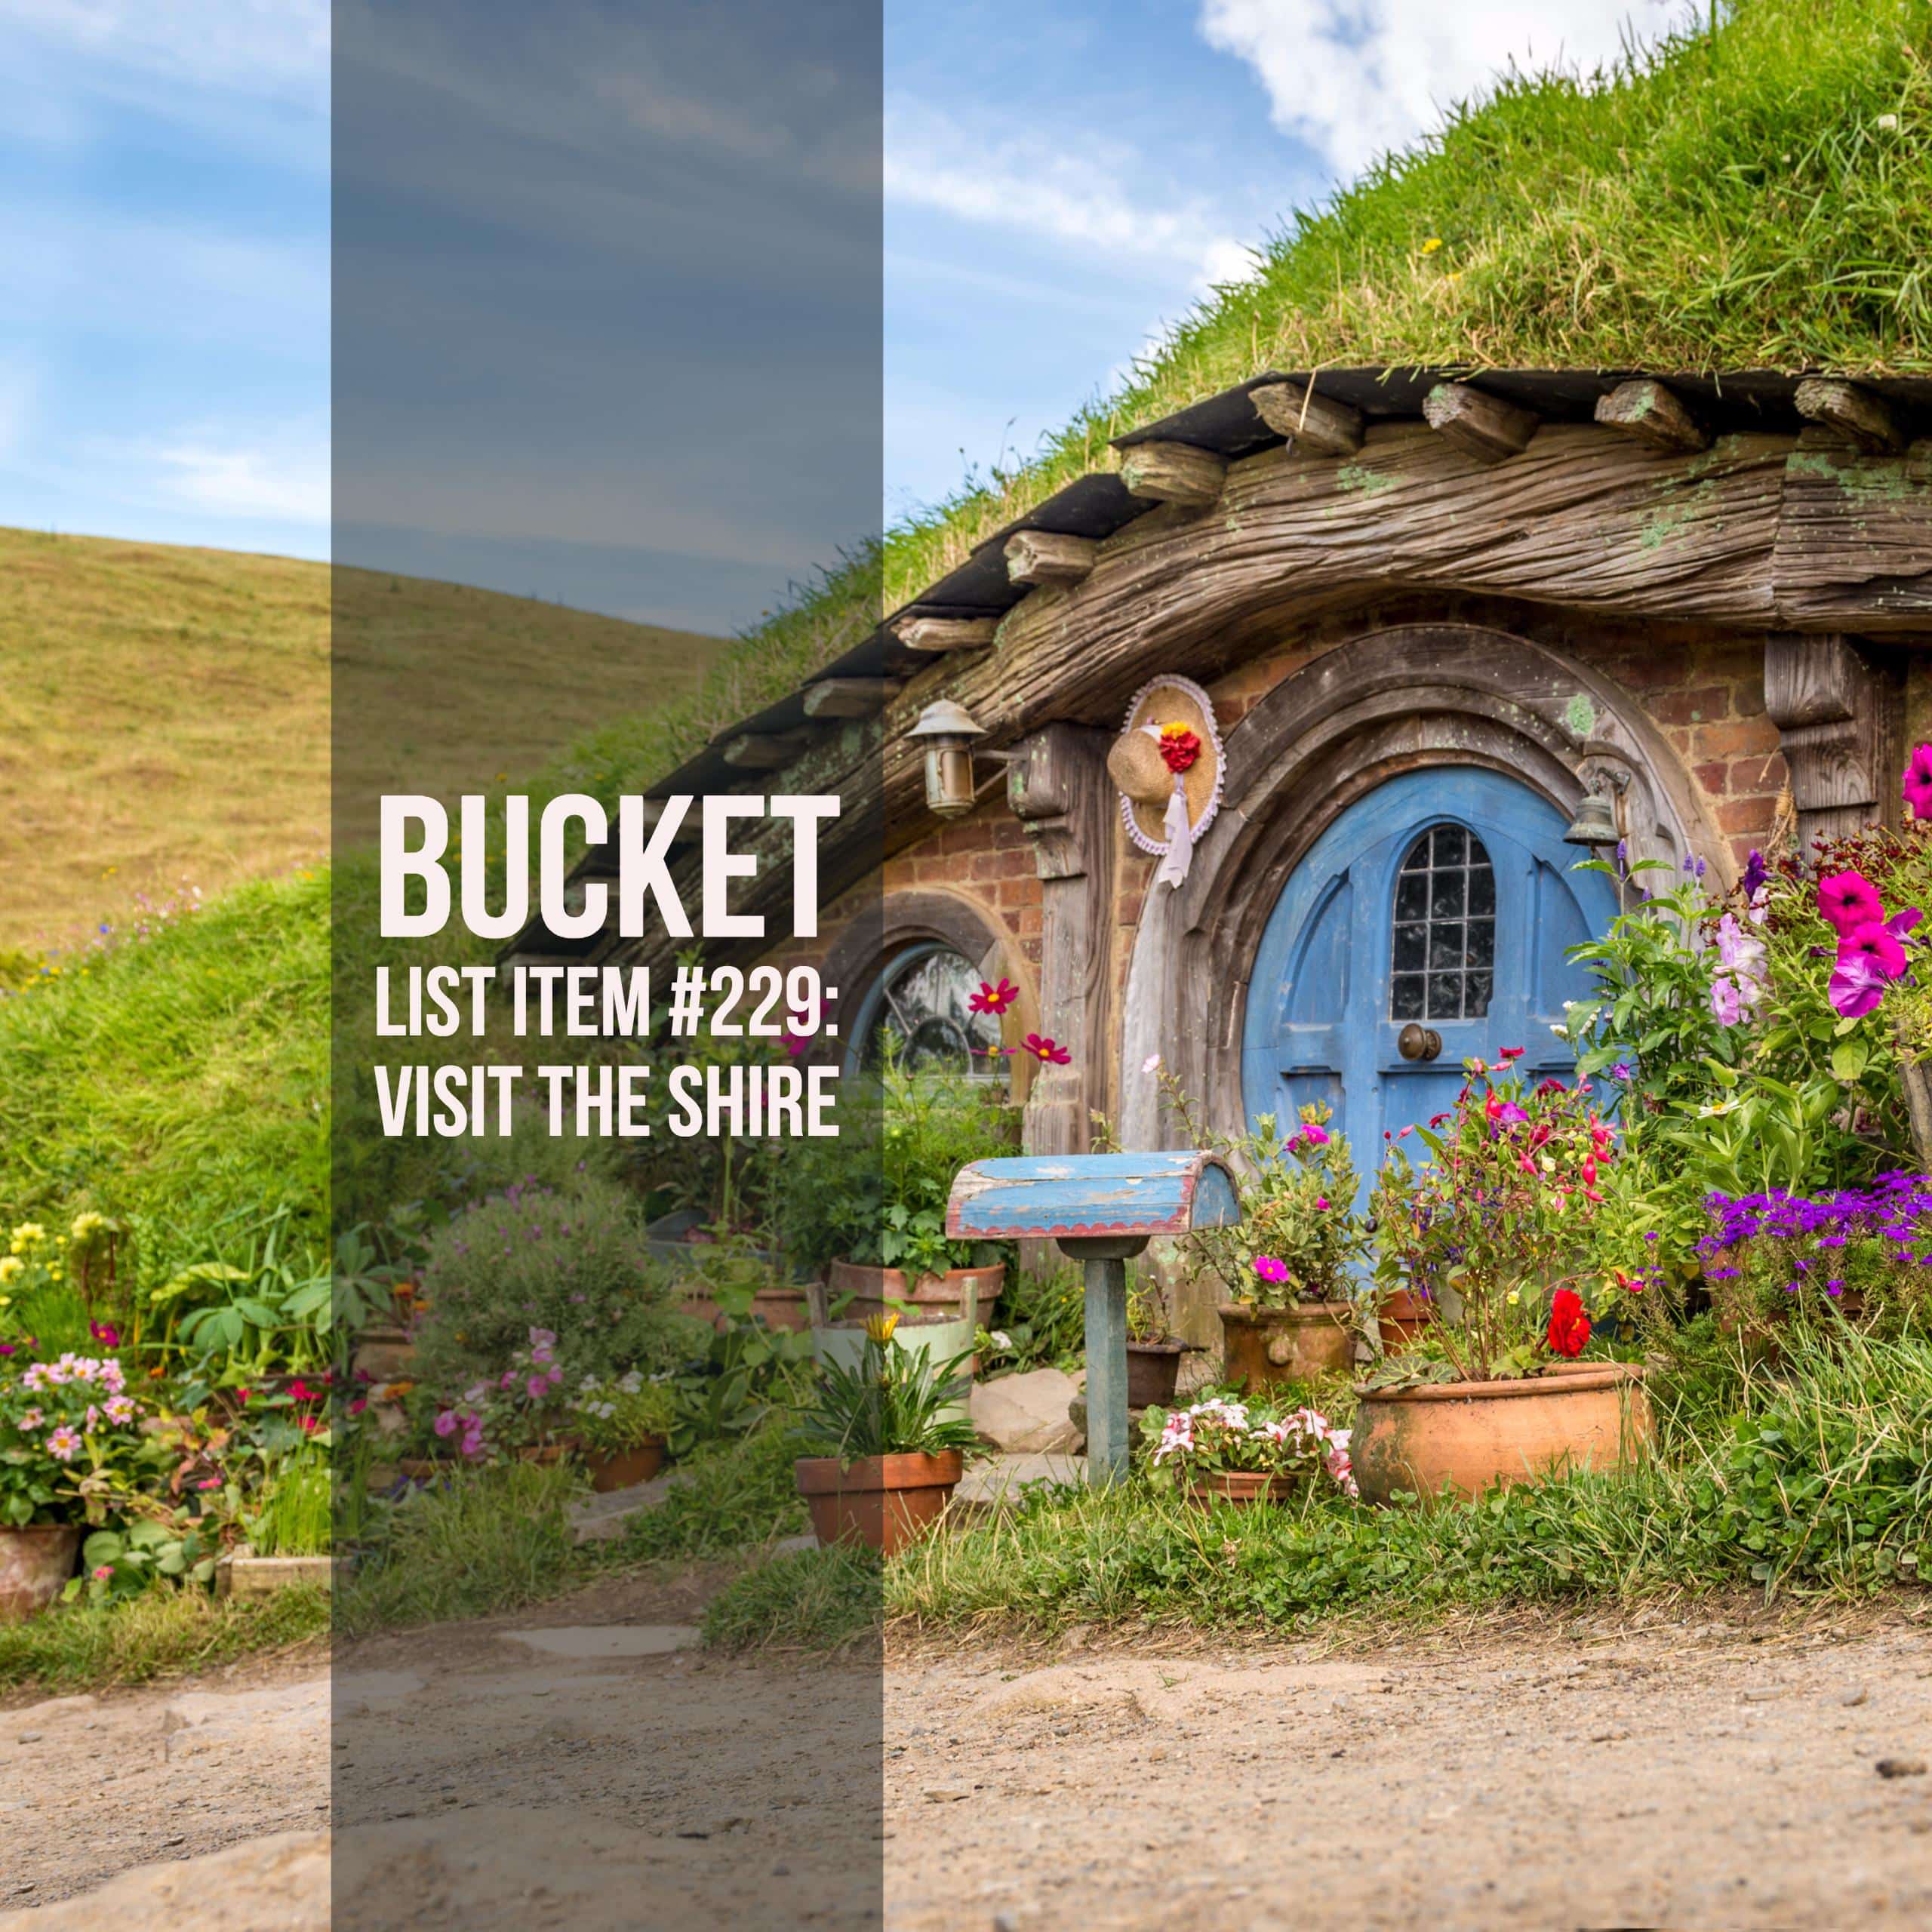 Bucket List Ideas: Visit the Shire in New Zealand